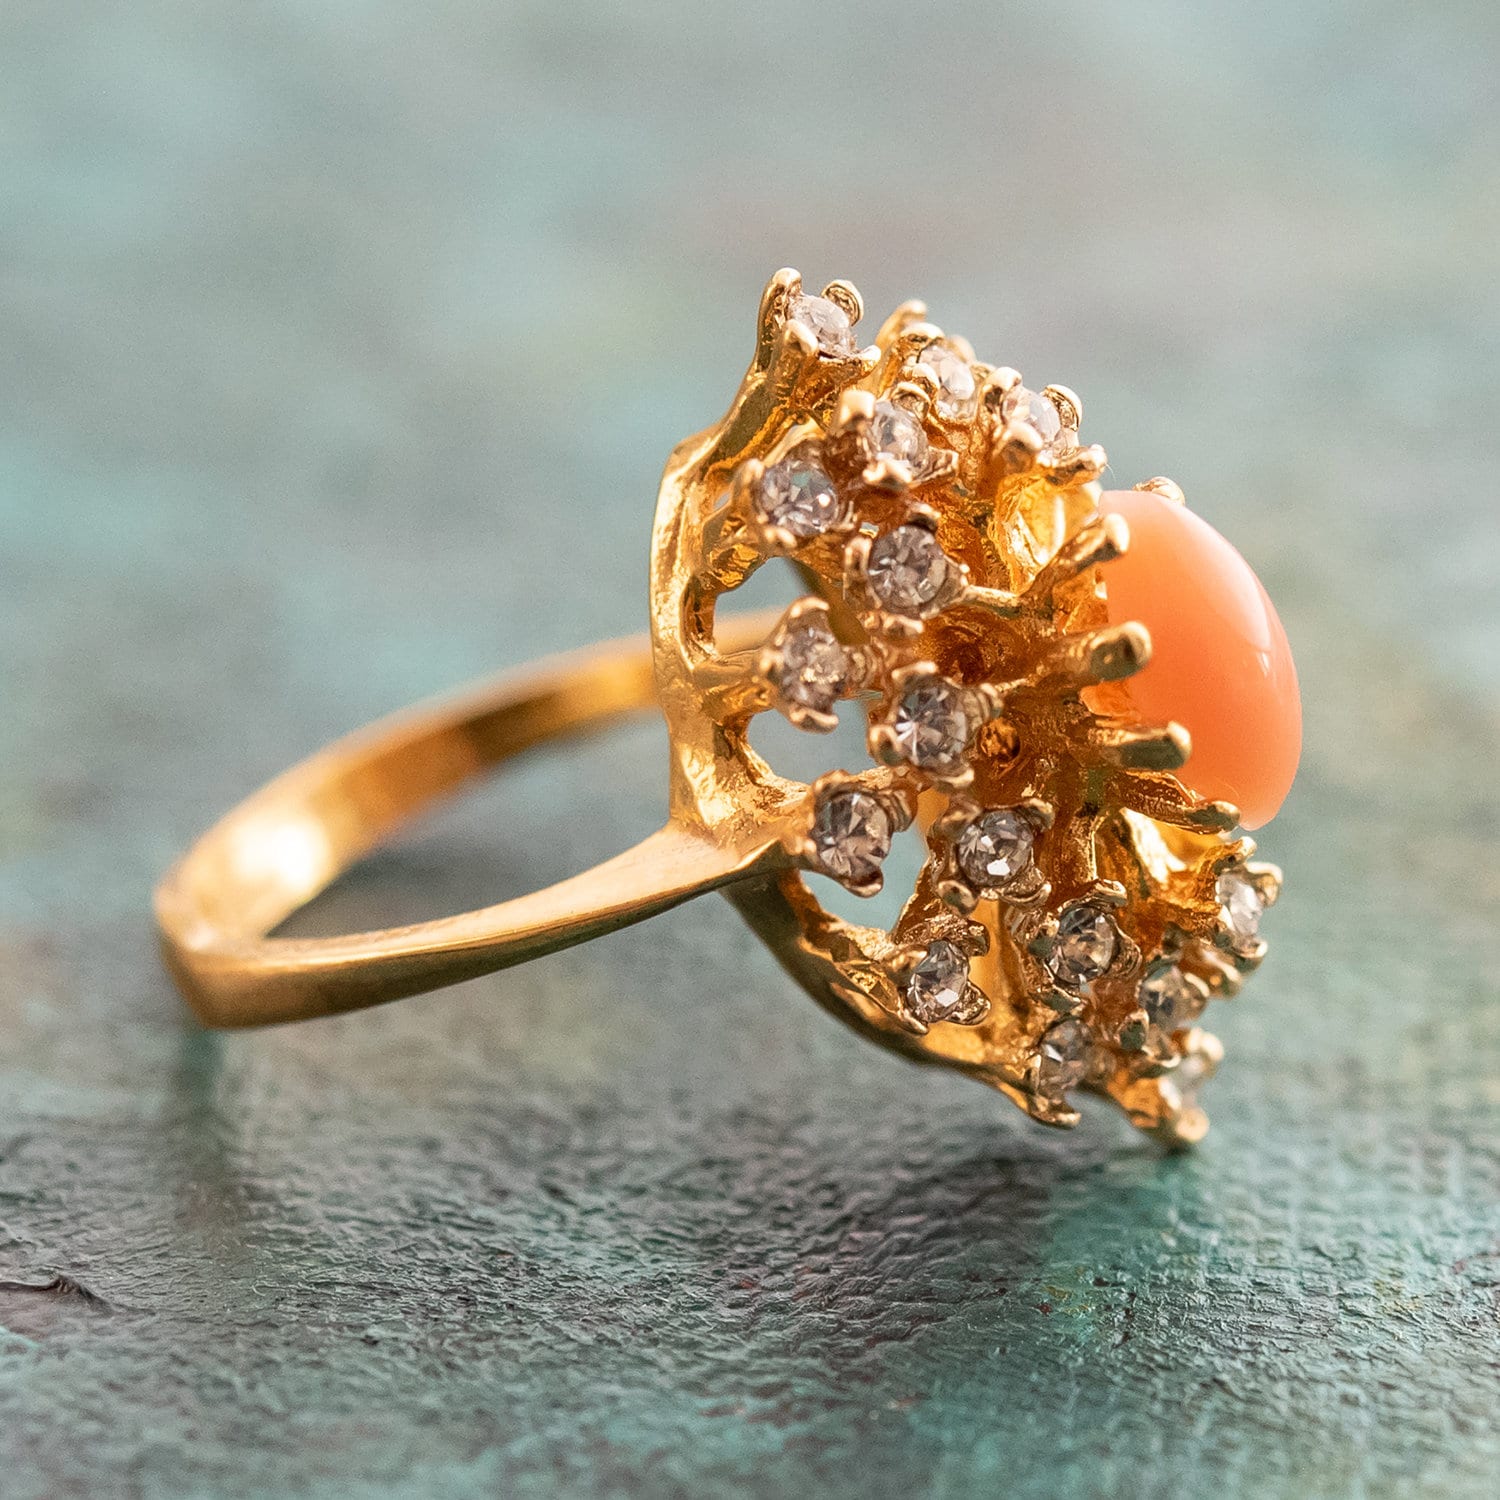 Vintage Ring Genuine Coral Surrounded by Clear Swarovski Crystals Cocktail Ring 18k Gold Size 4 Only R221